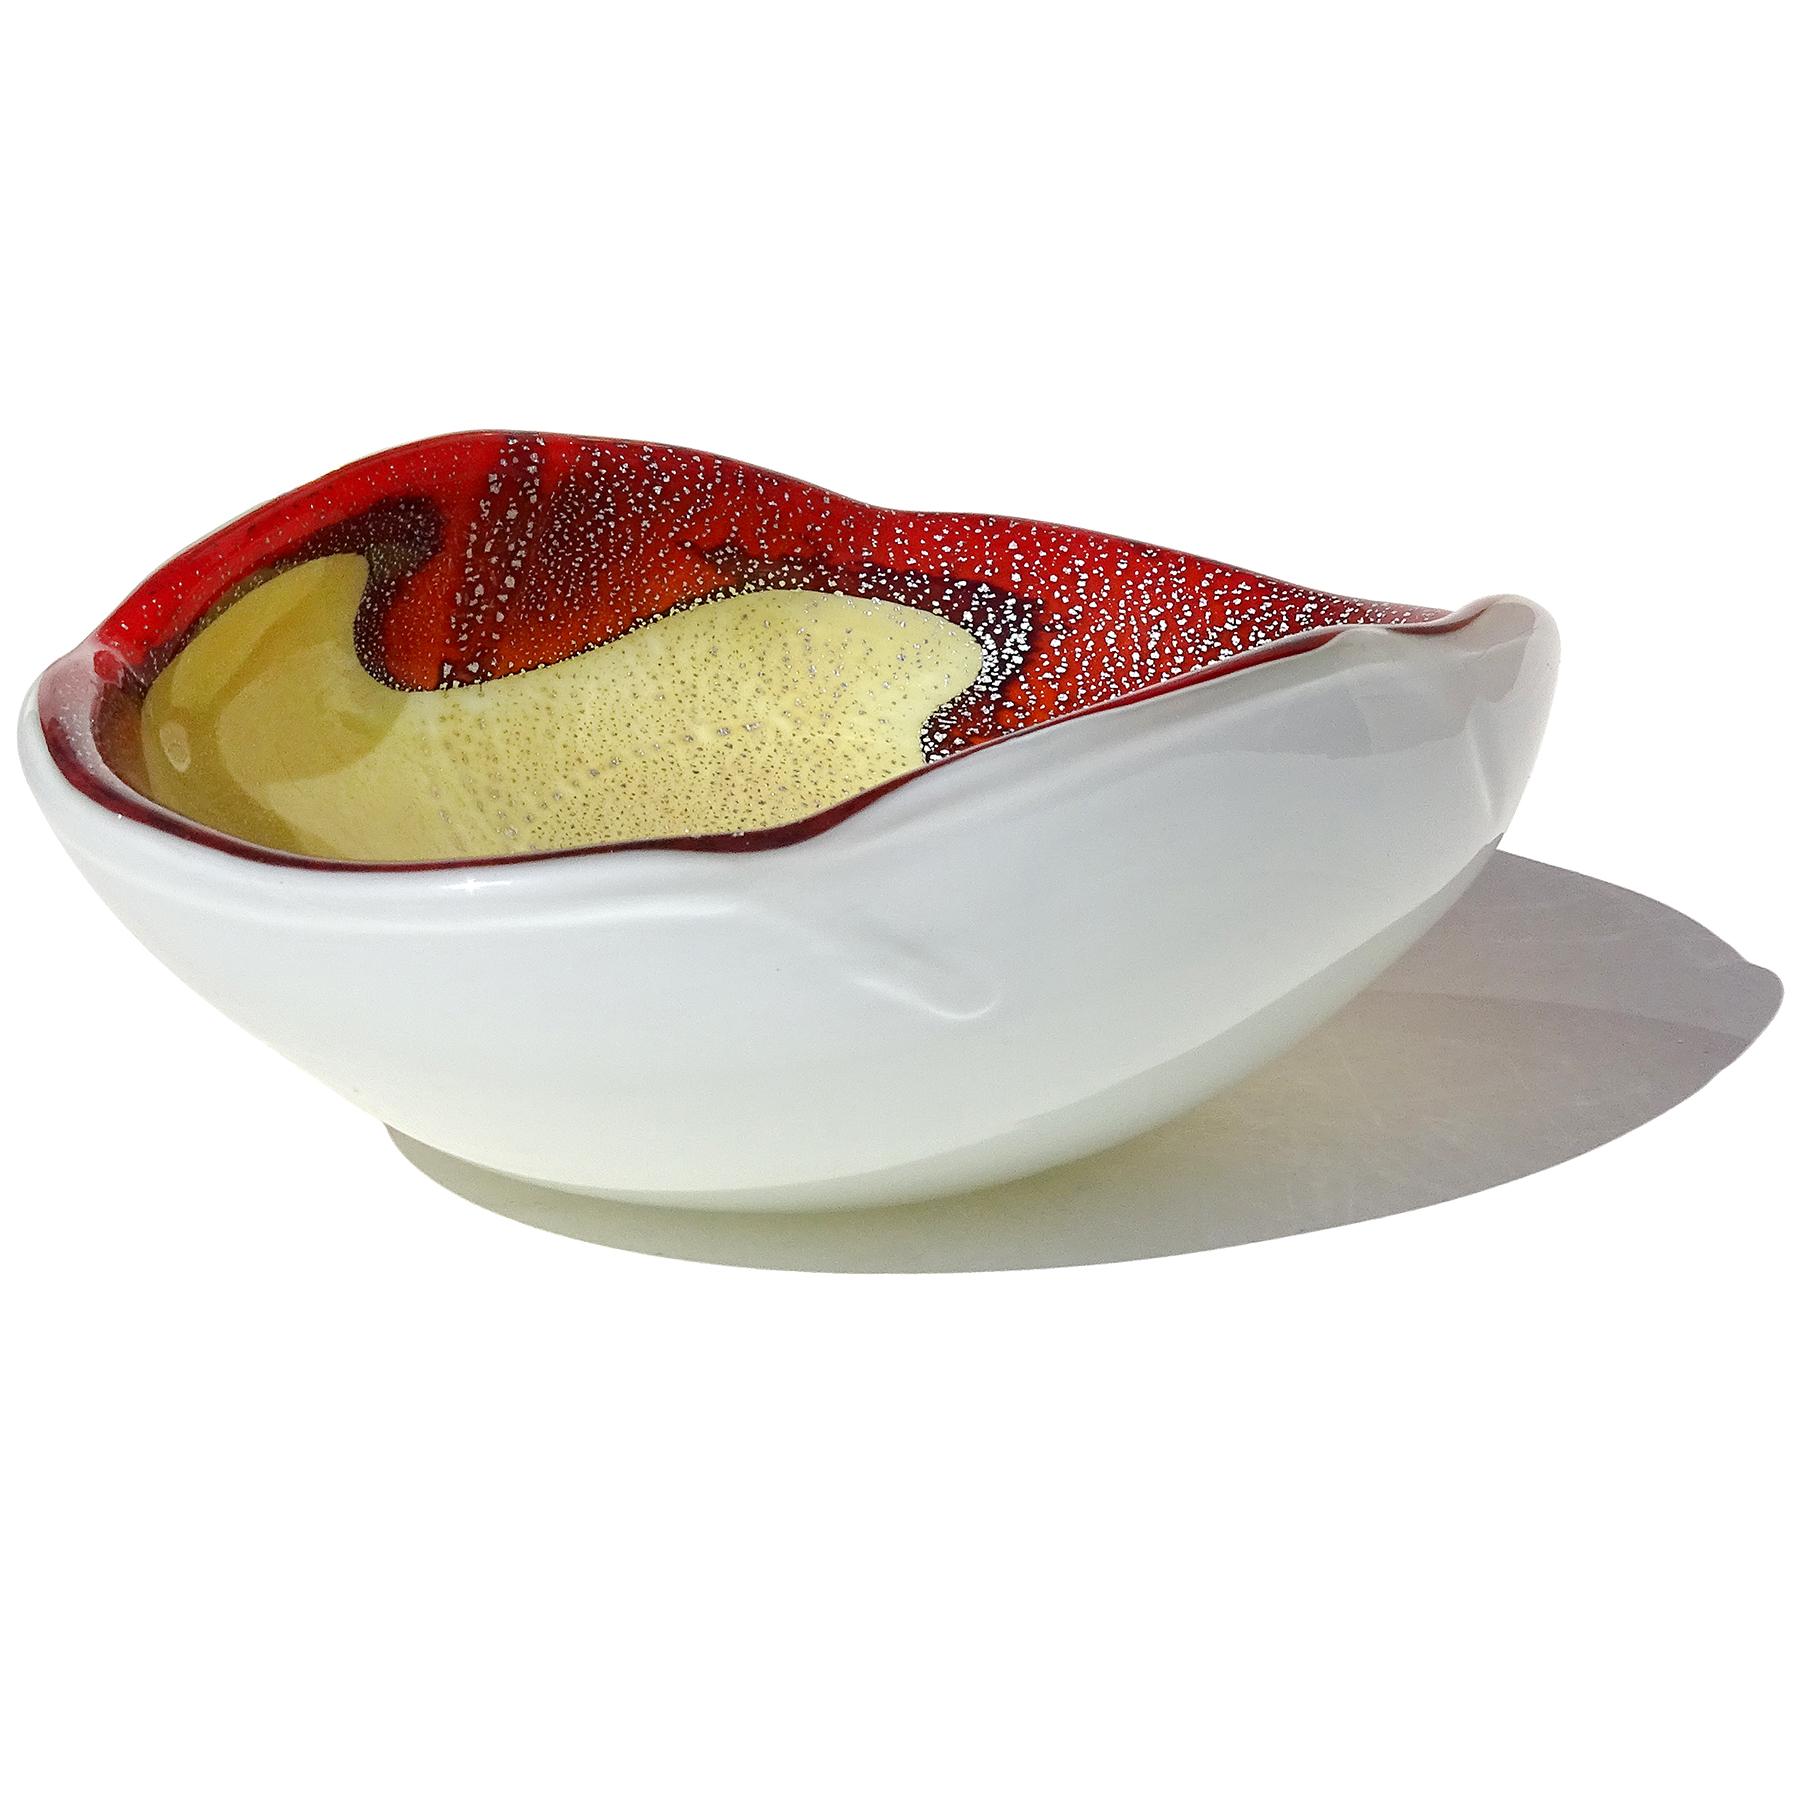 Beautiful vintage Murano hand blown white over yellow, red rim and silver flecks Italian art glass oval shaped bowl. Attributed to the A.Ve.M. (Arte Vetraria Muranese) company and to designer Giulio Radi. The bowl has an abstract red design on the